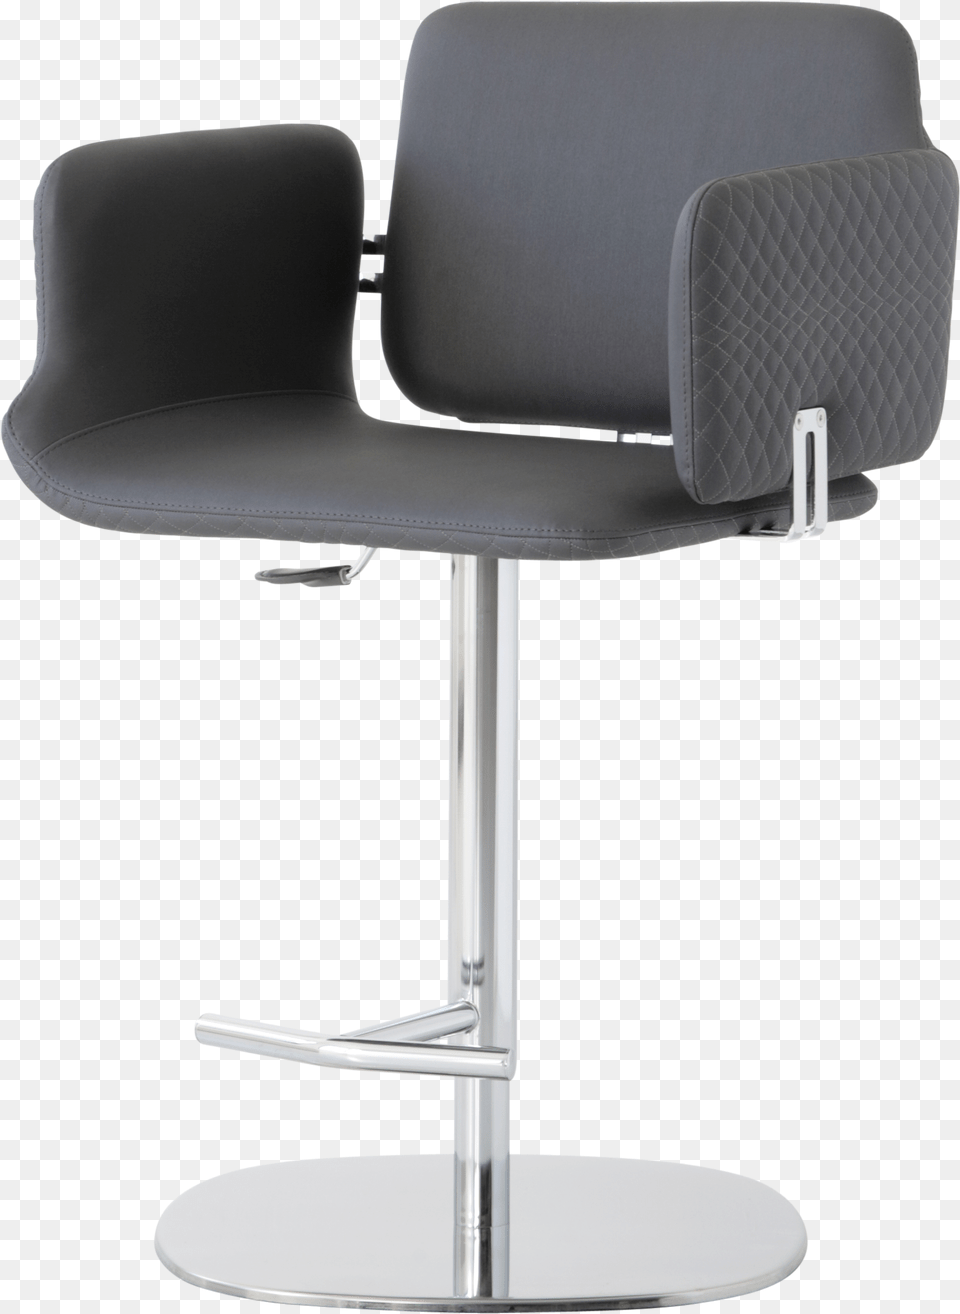 Barber Chair, Cushion, Furniture, Home Decor Png Image